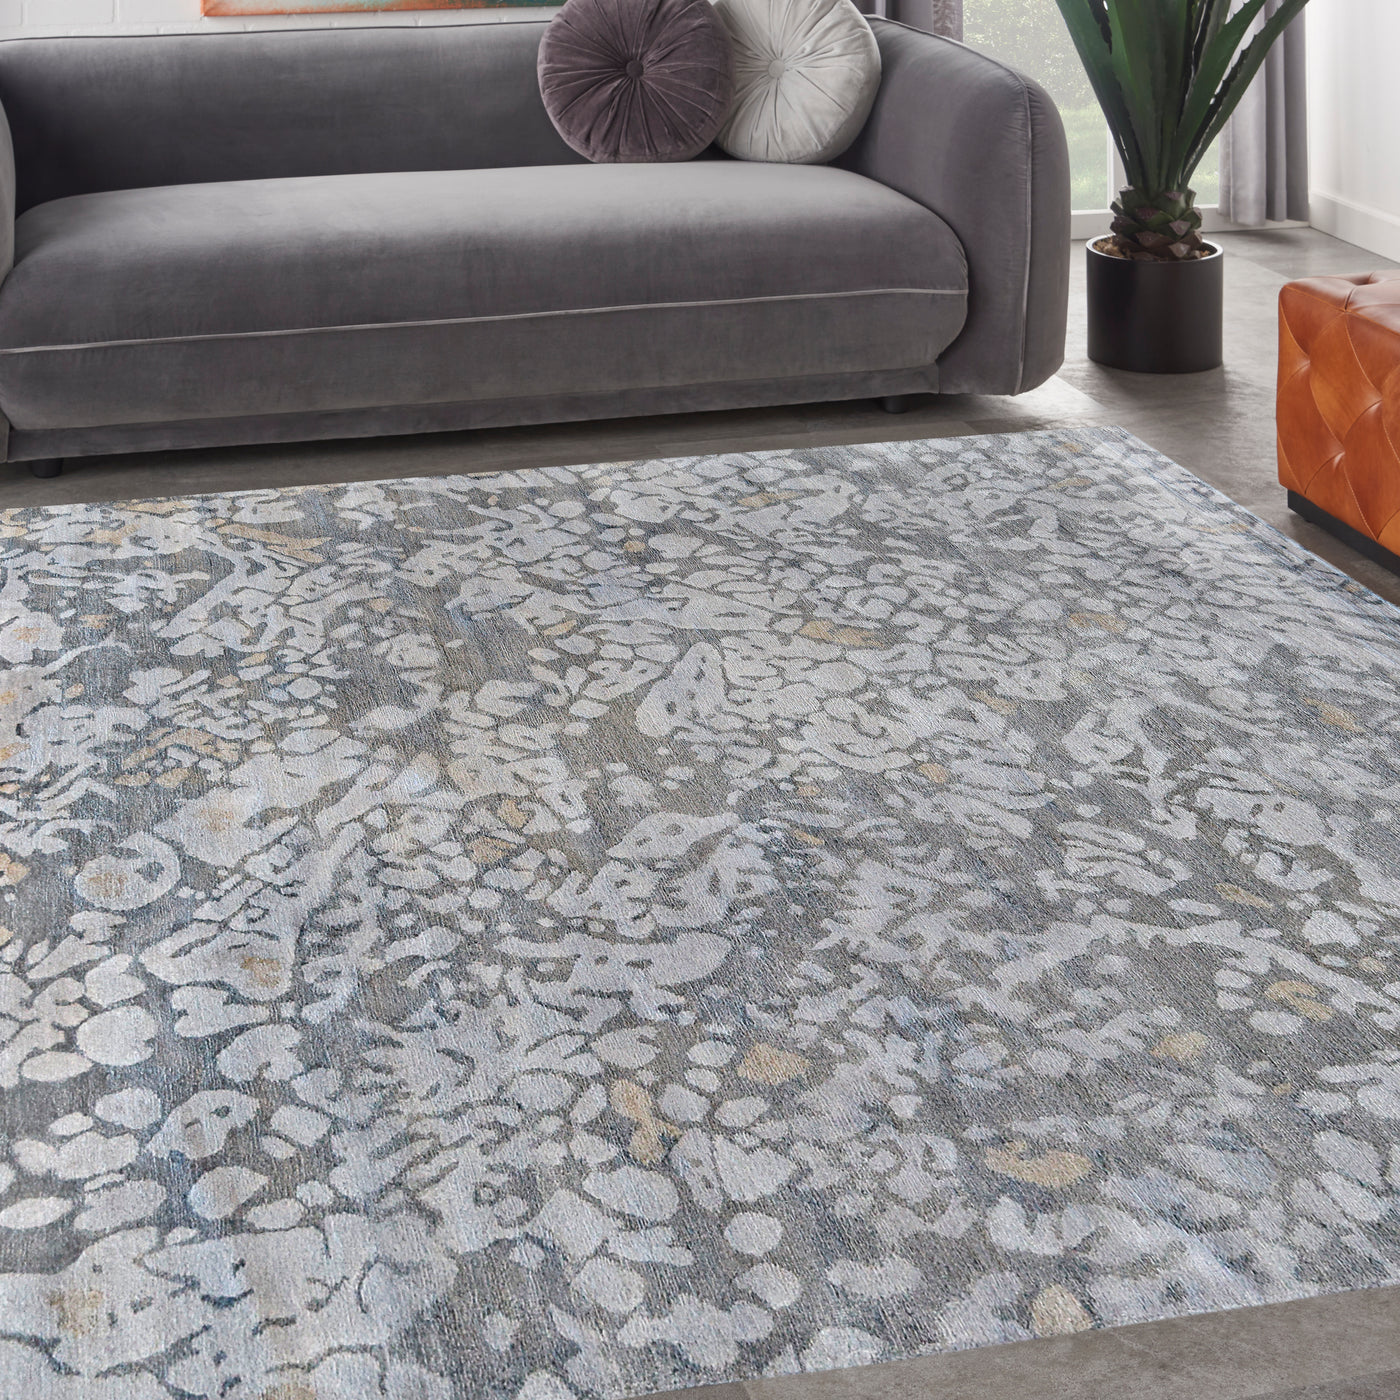 Iron Pyrite Mineral Rug